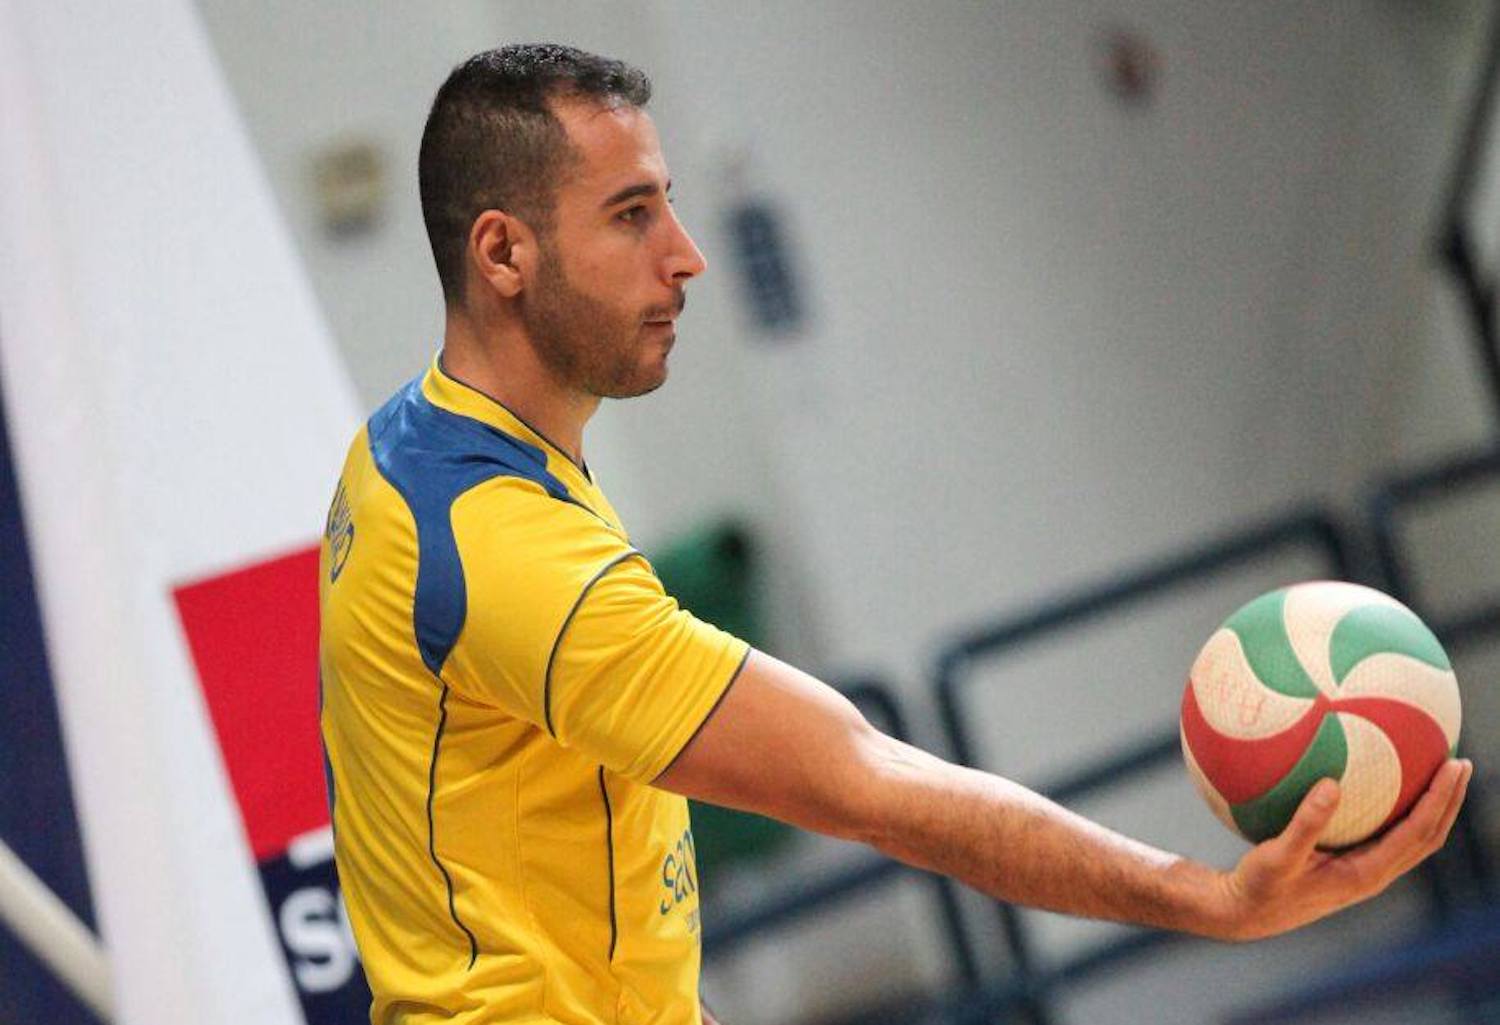 LEBANON’S RAWAD HASSAN PLAYING HIS BEST VOLLEYBALL AT AGE 40